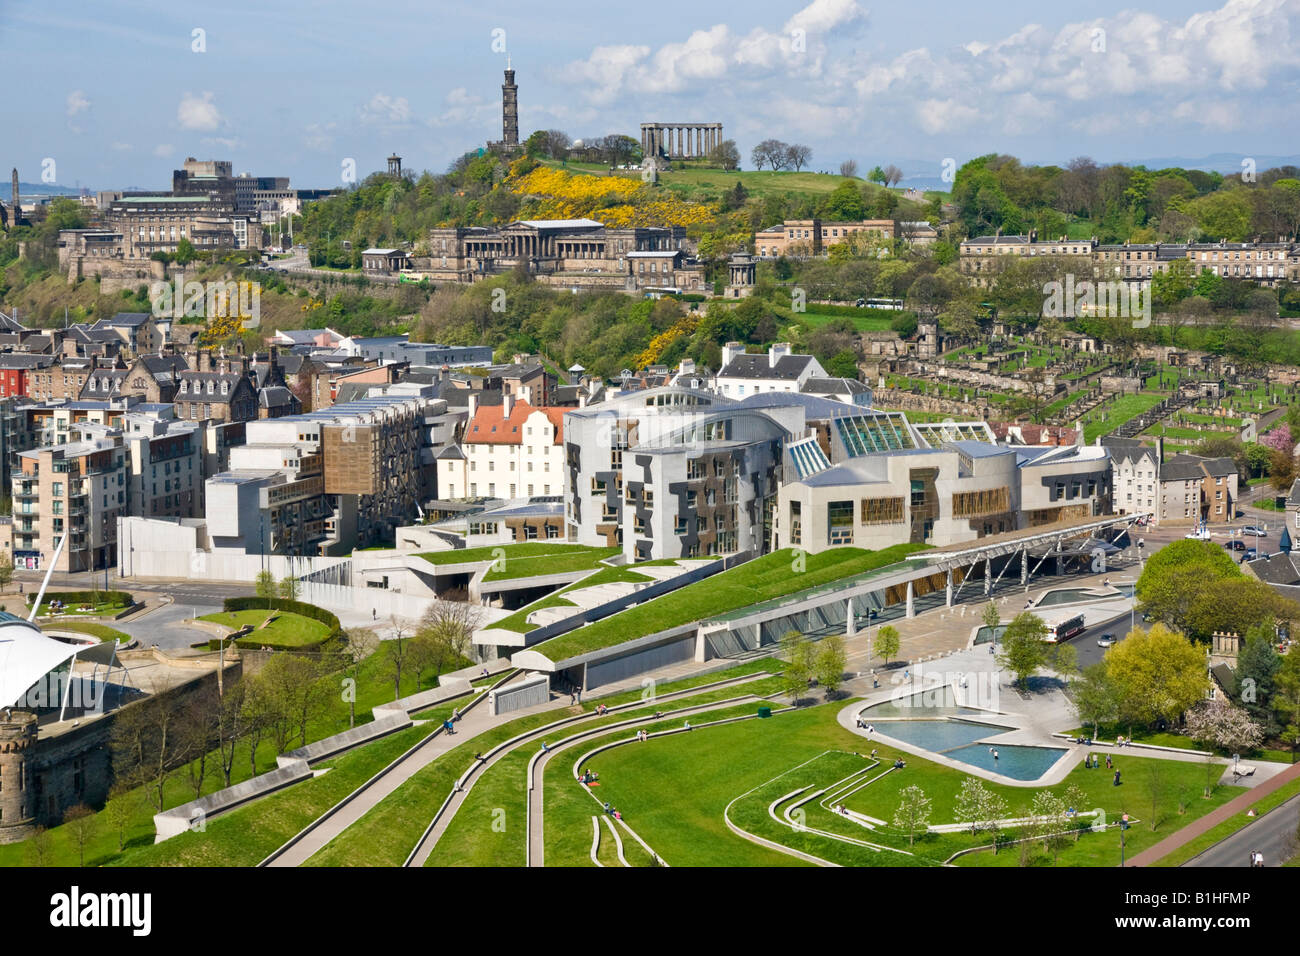 View of The Scottish Parliament and front lawn area with Calton Hill in Edinburgh Scotland on a sunny spring day Stock Photo